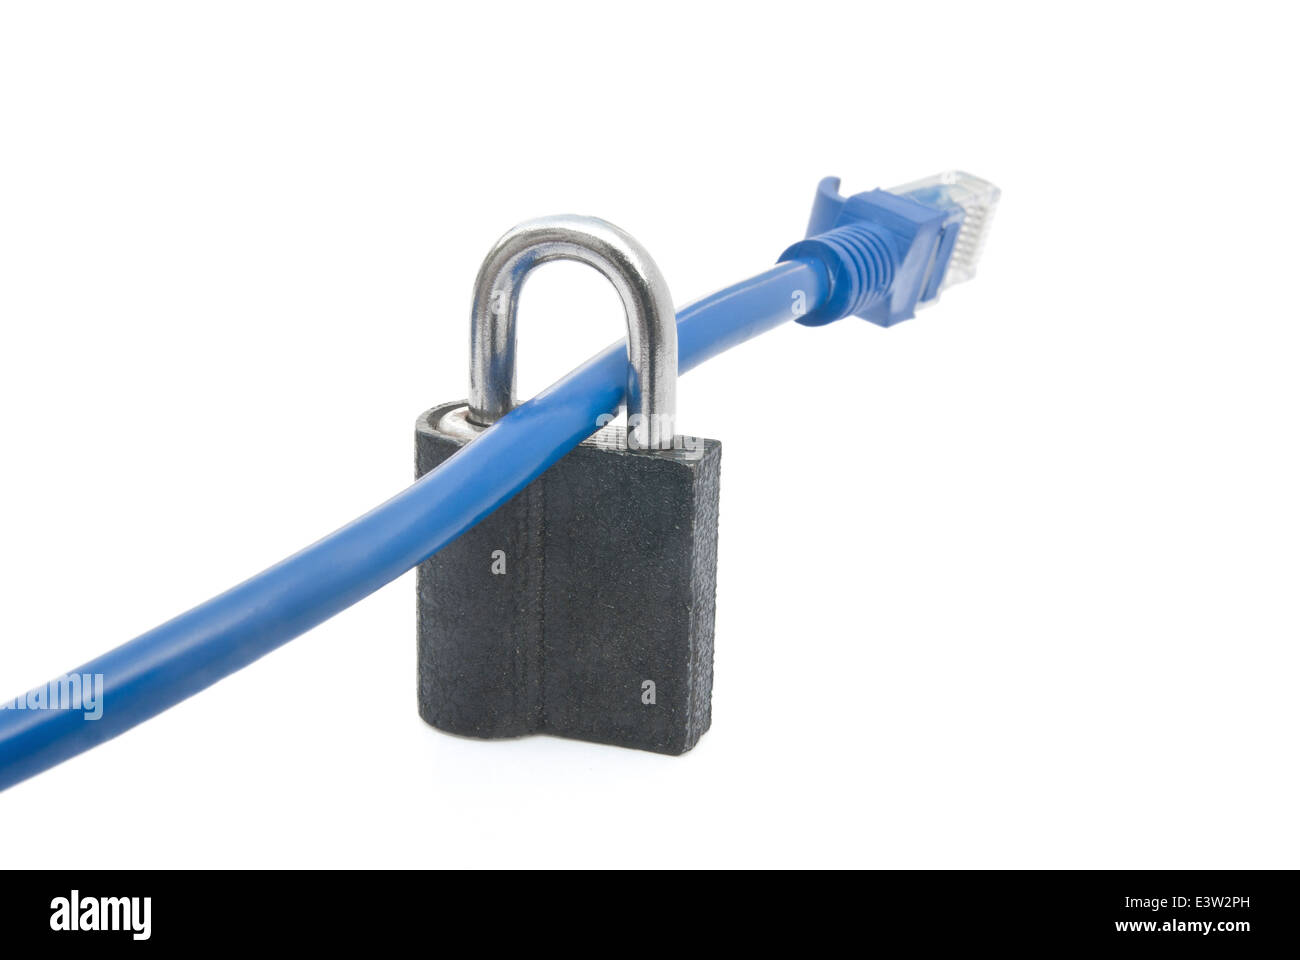 pad lock and network cable with clipping path Stock Photo